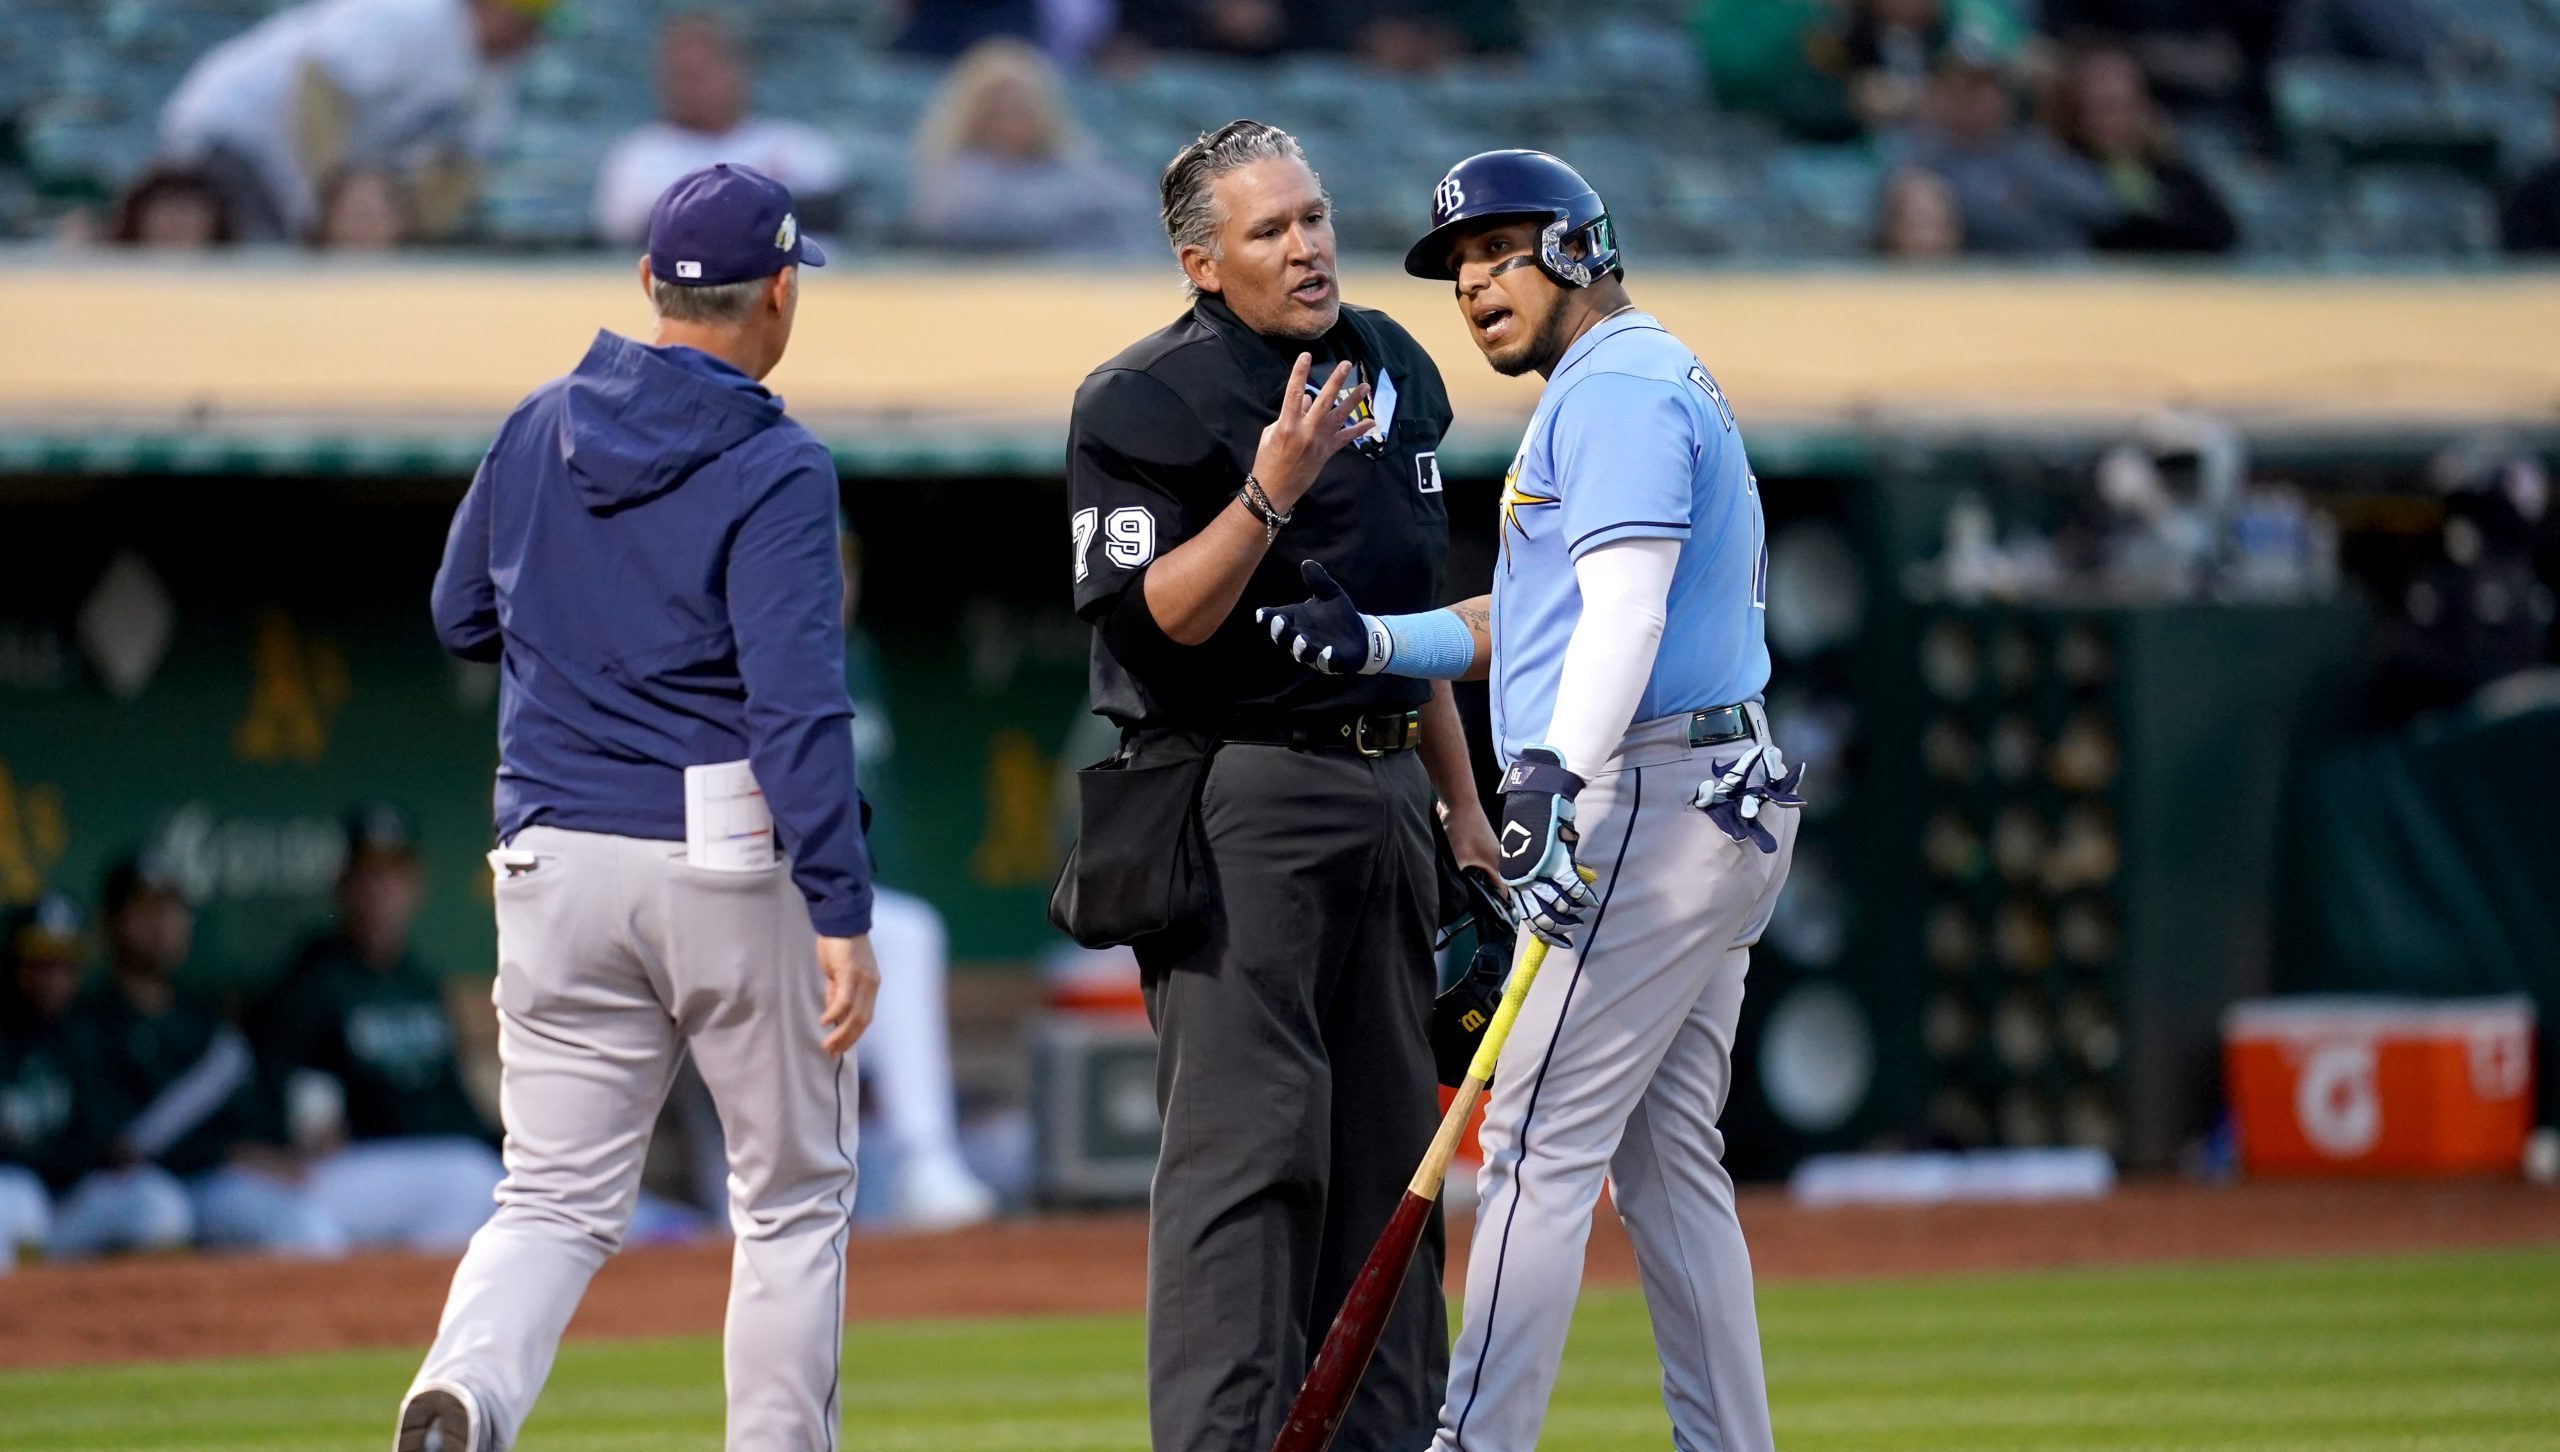 Rays third baseman Isaac Paredes was ejected from Monday's game with the A's despite barely arguing a call against him.